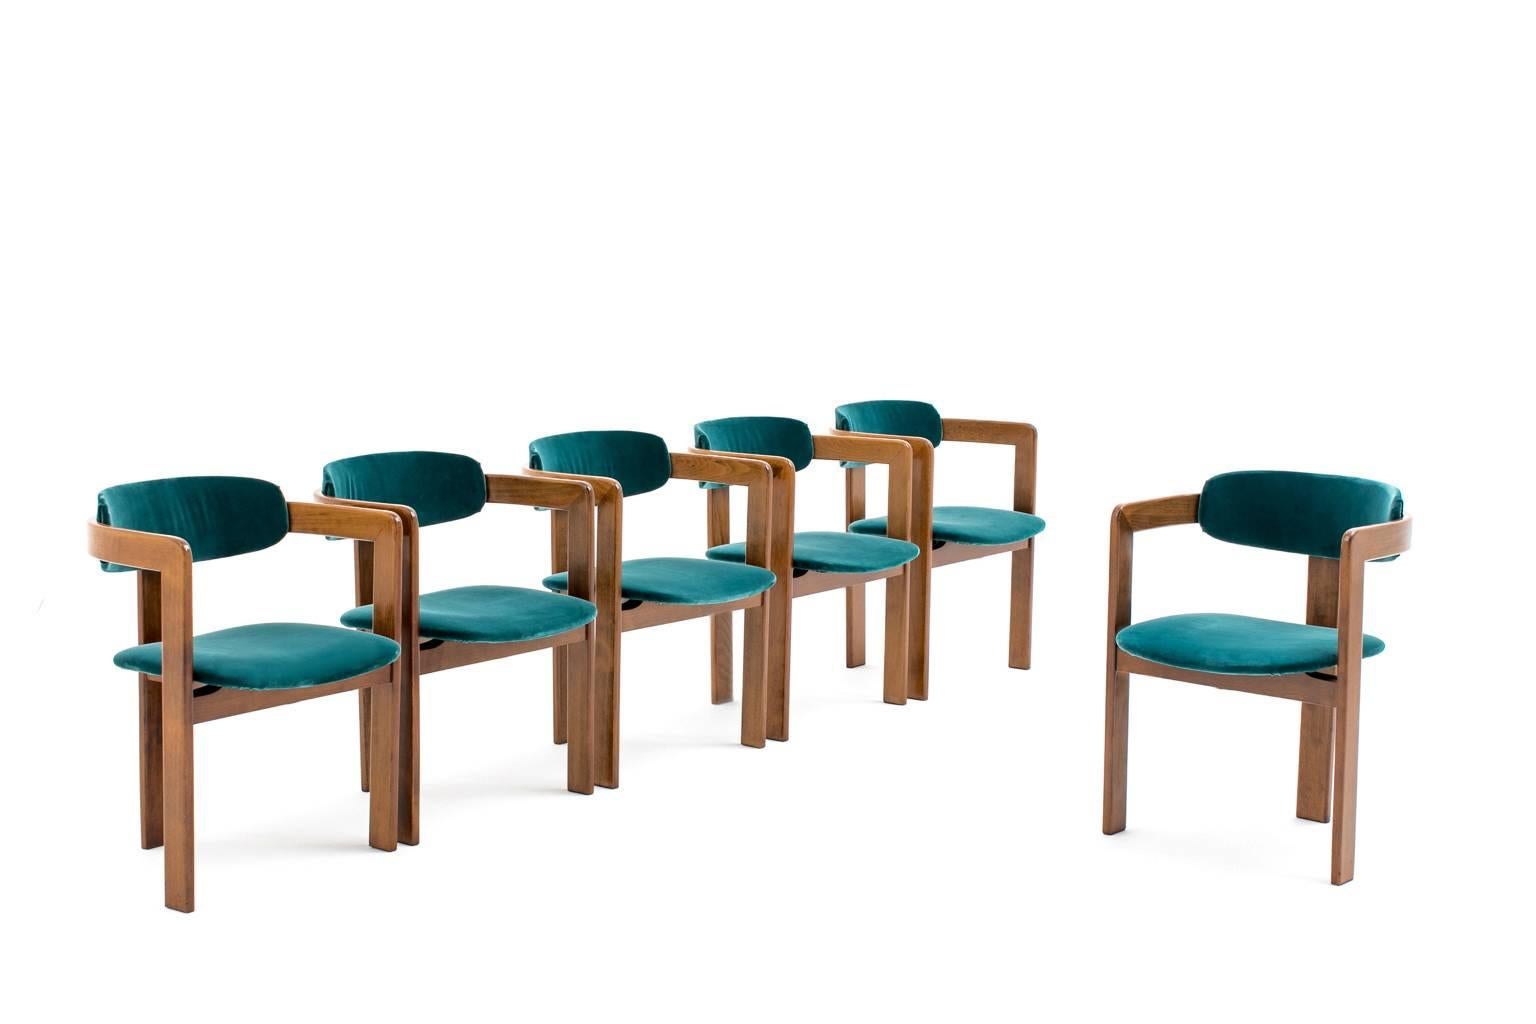 Great set of six bentwood dining chairs, Italy, 1960s. The chairs are very nice made from solid bentwood. The design is similar to the Pigreco chairs of Scarpa with the exception of the hind leg; this set has a single leg instead of two. The wooden